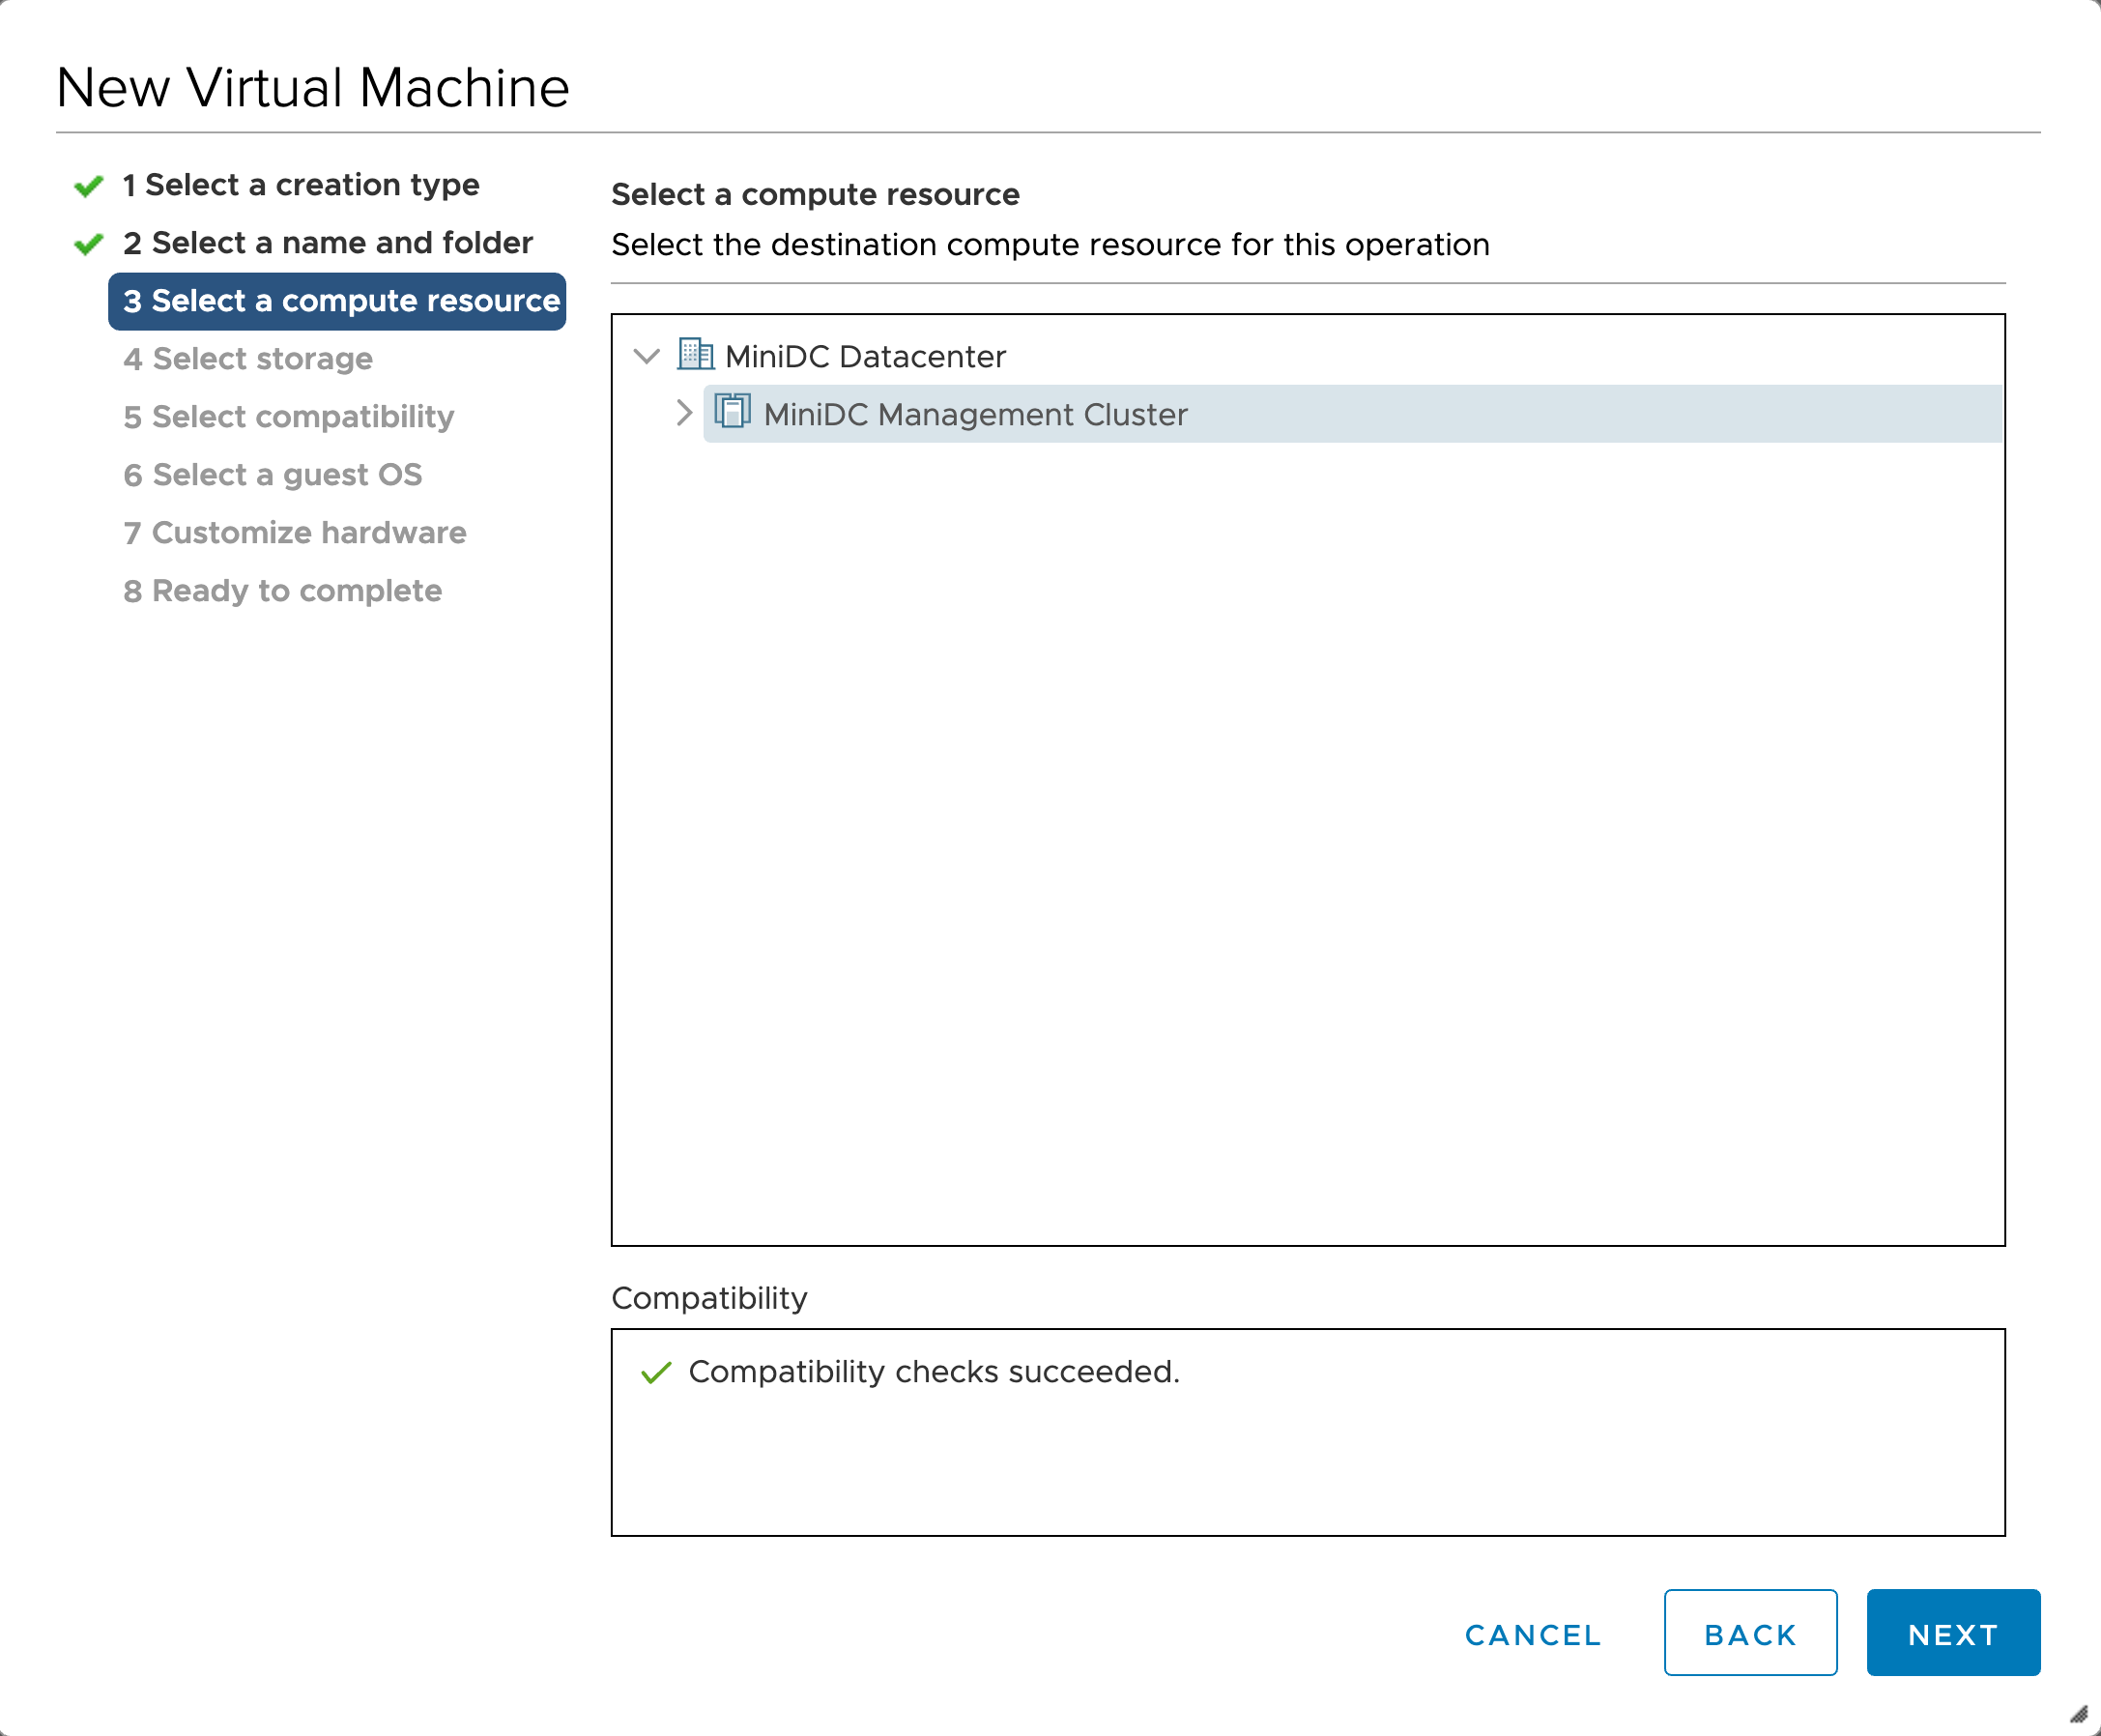 Screenshot of the "Select a compute resource" section of the New Virtual Machine creation pane.